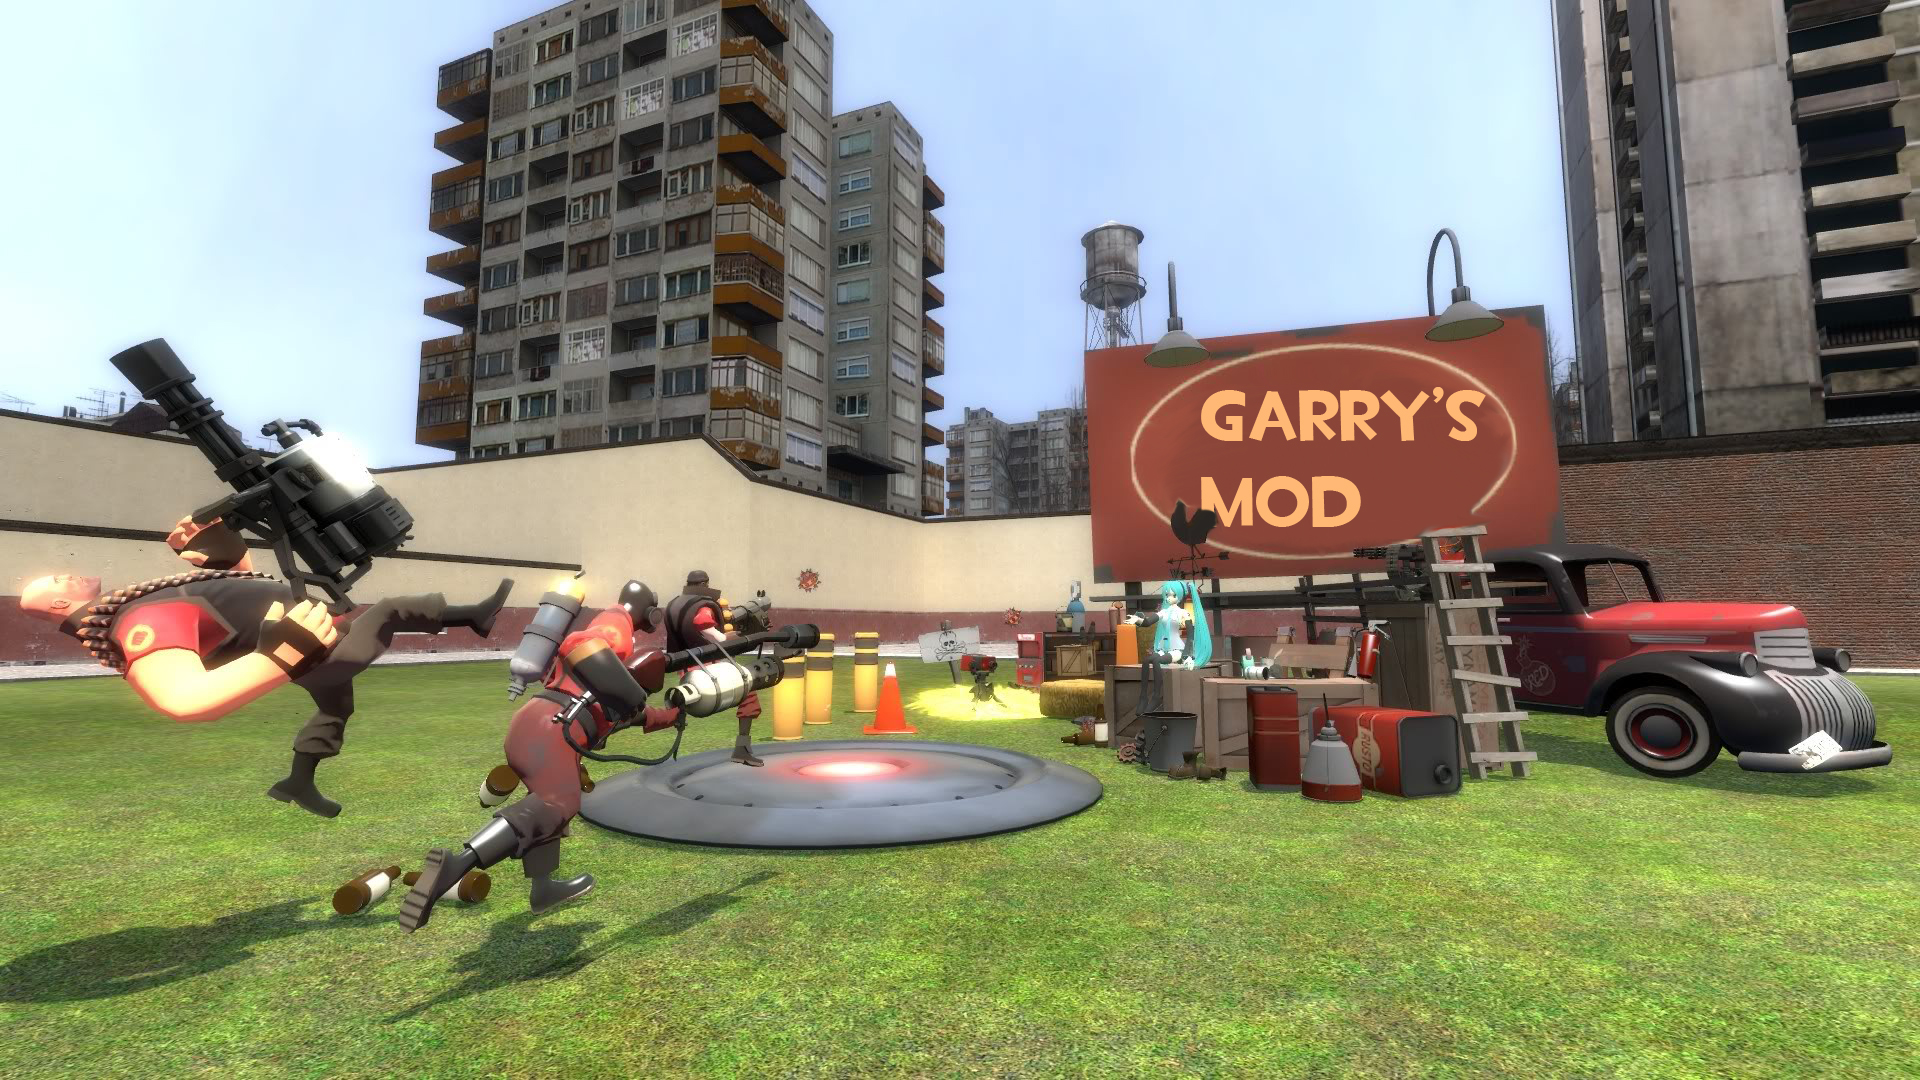 Garry's Mod Free Download for Windows SoftCamel